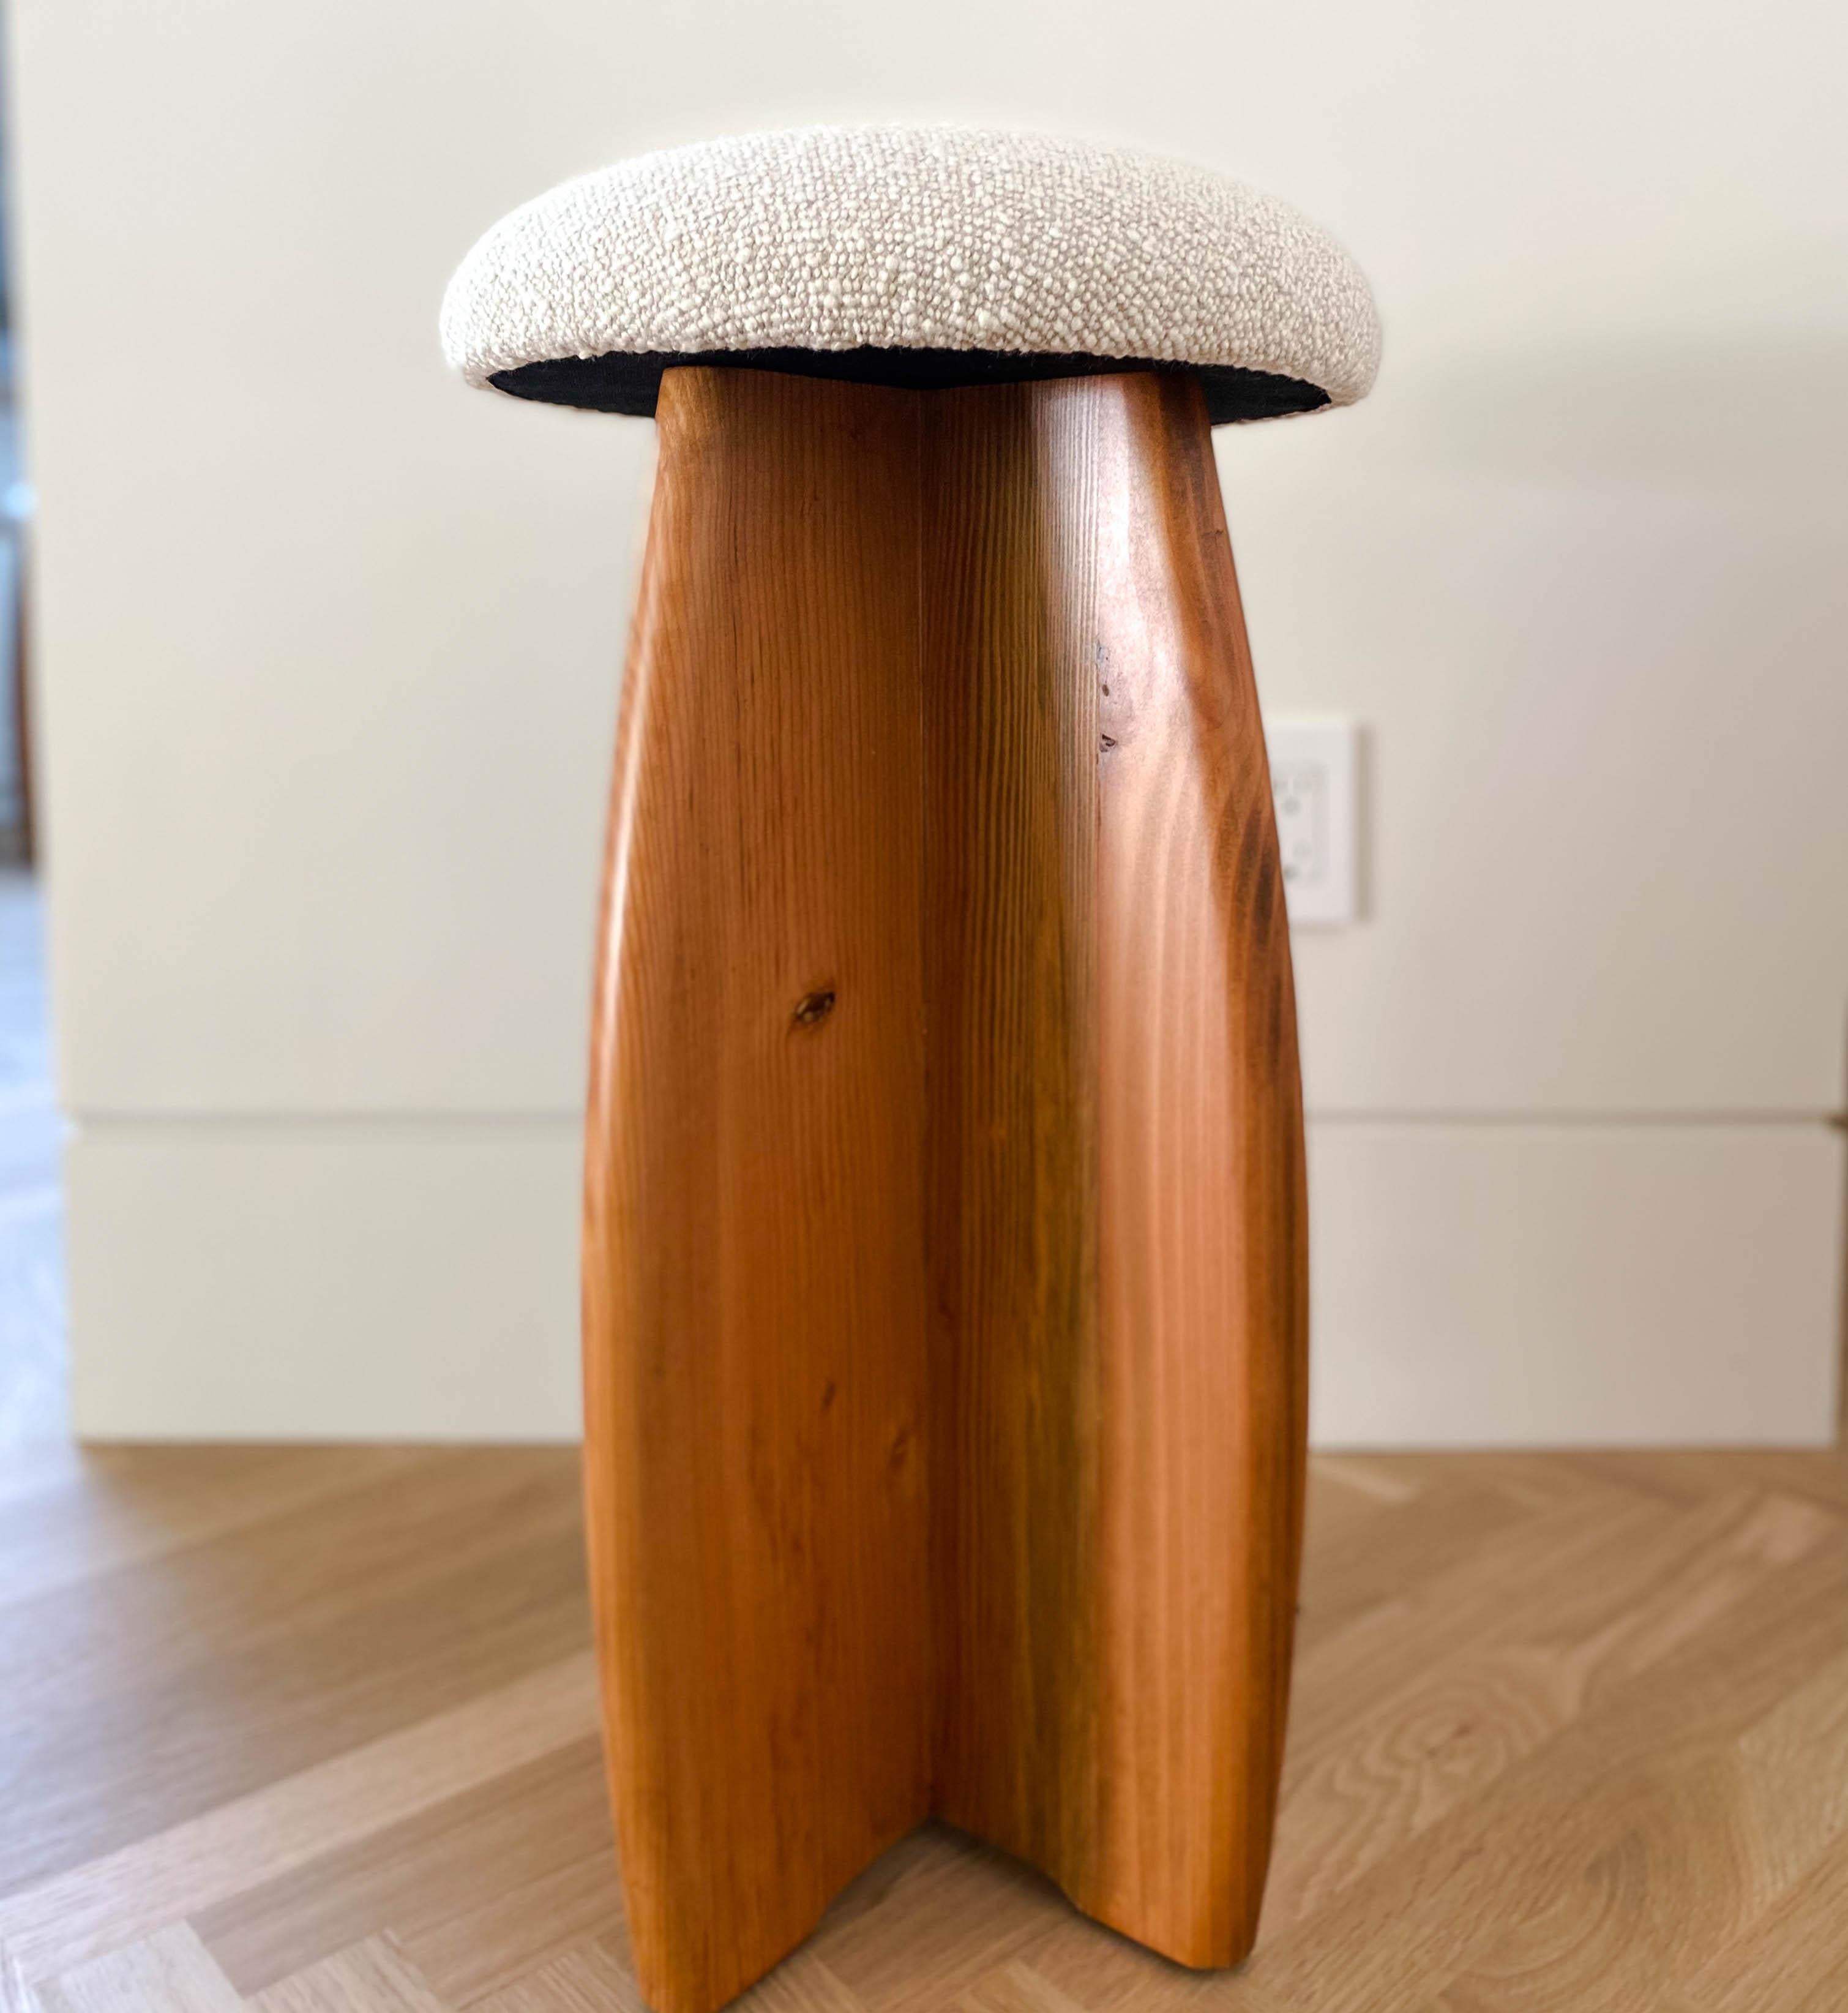 Custom studio Osklo stool 1 - counter height in knotty pine available in 6-8 weeks lead time.